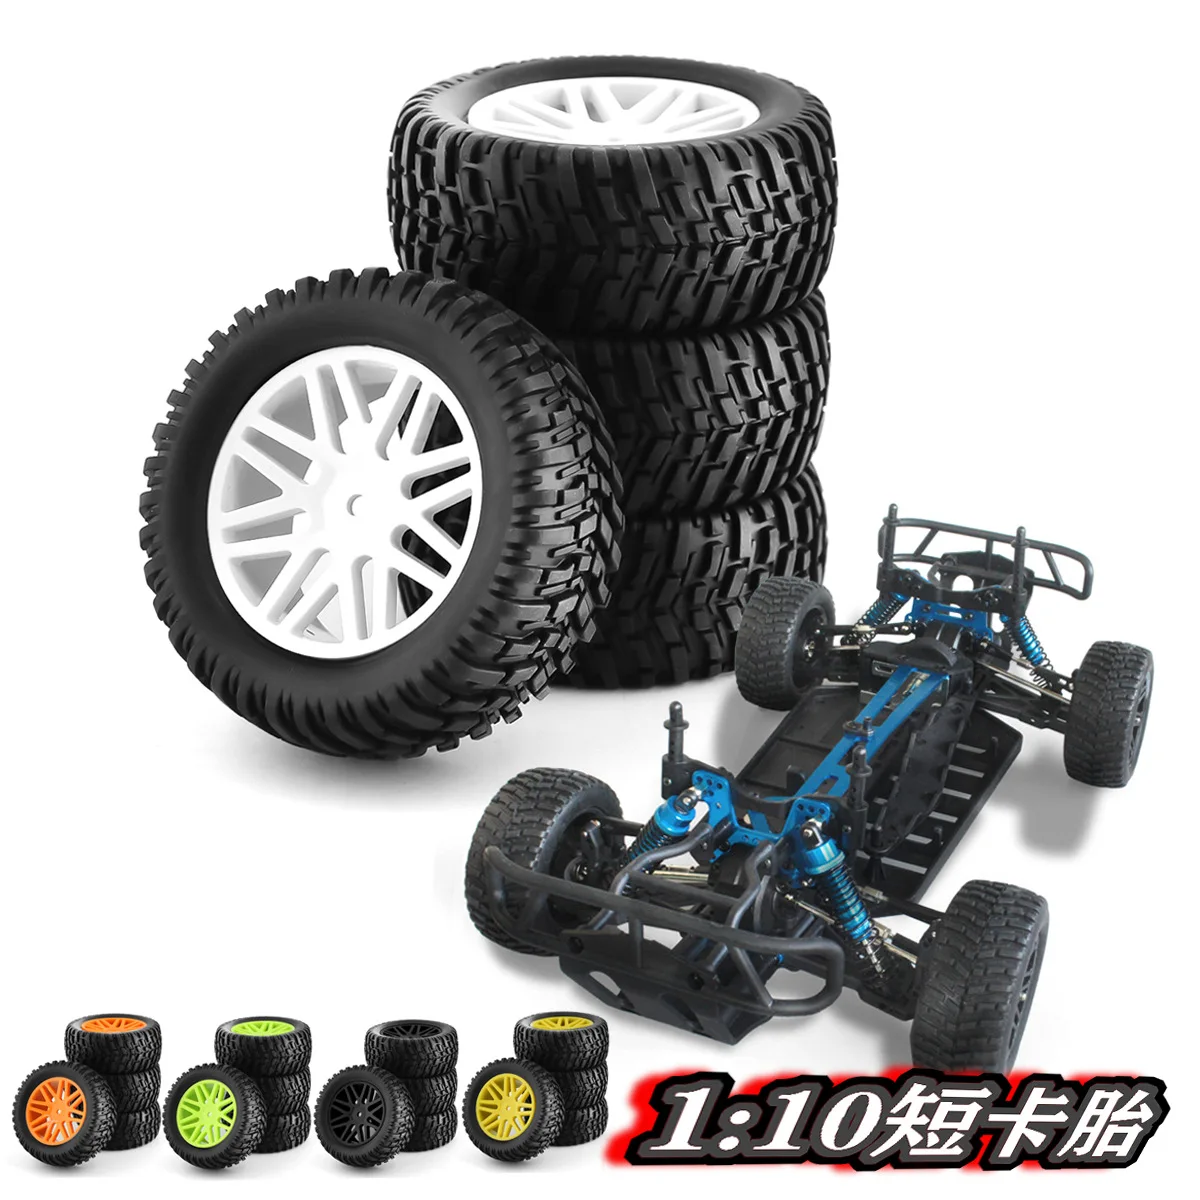 

4pcs/Lot Rubber RC 1/10 Buggy Wheels & Tires 12mm Hex Hub Mount For RC Off Road Car HSP HP